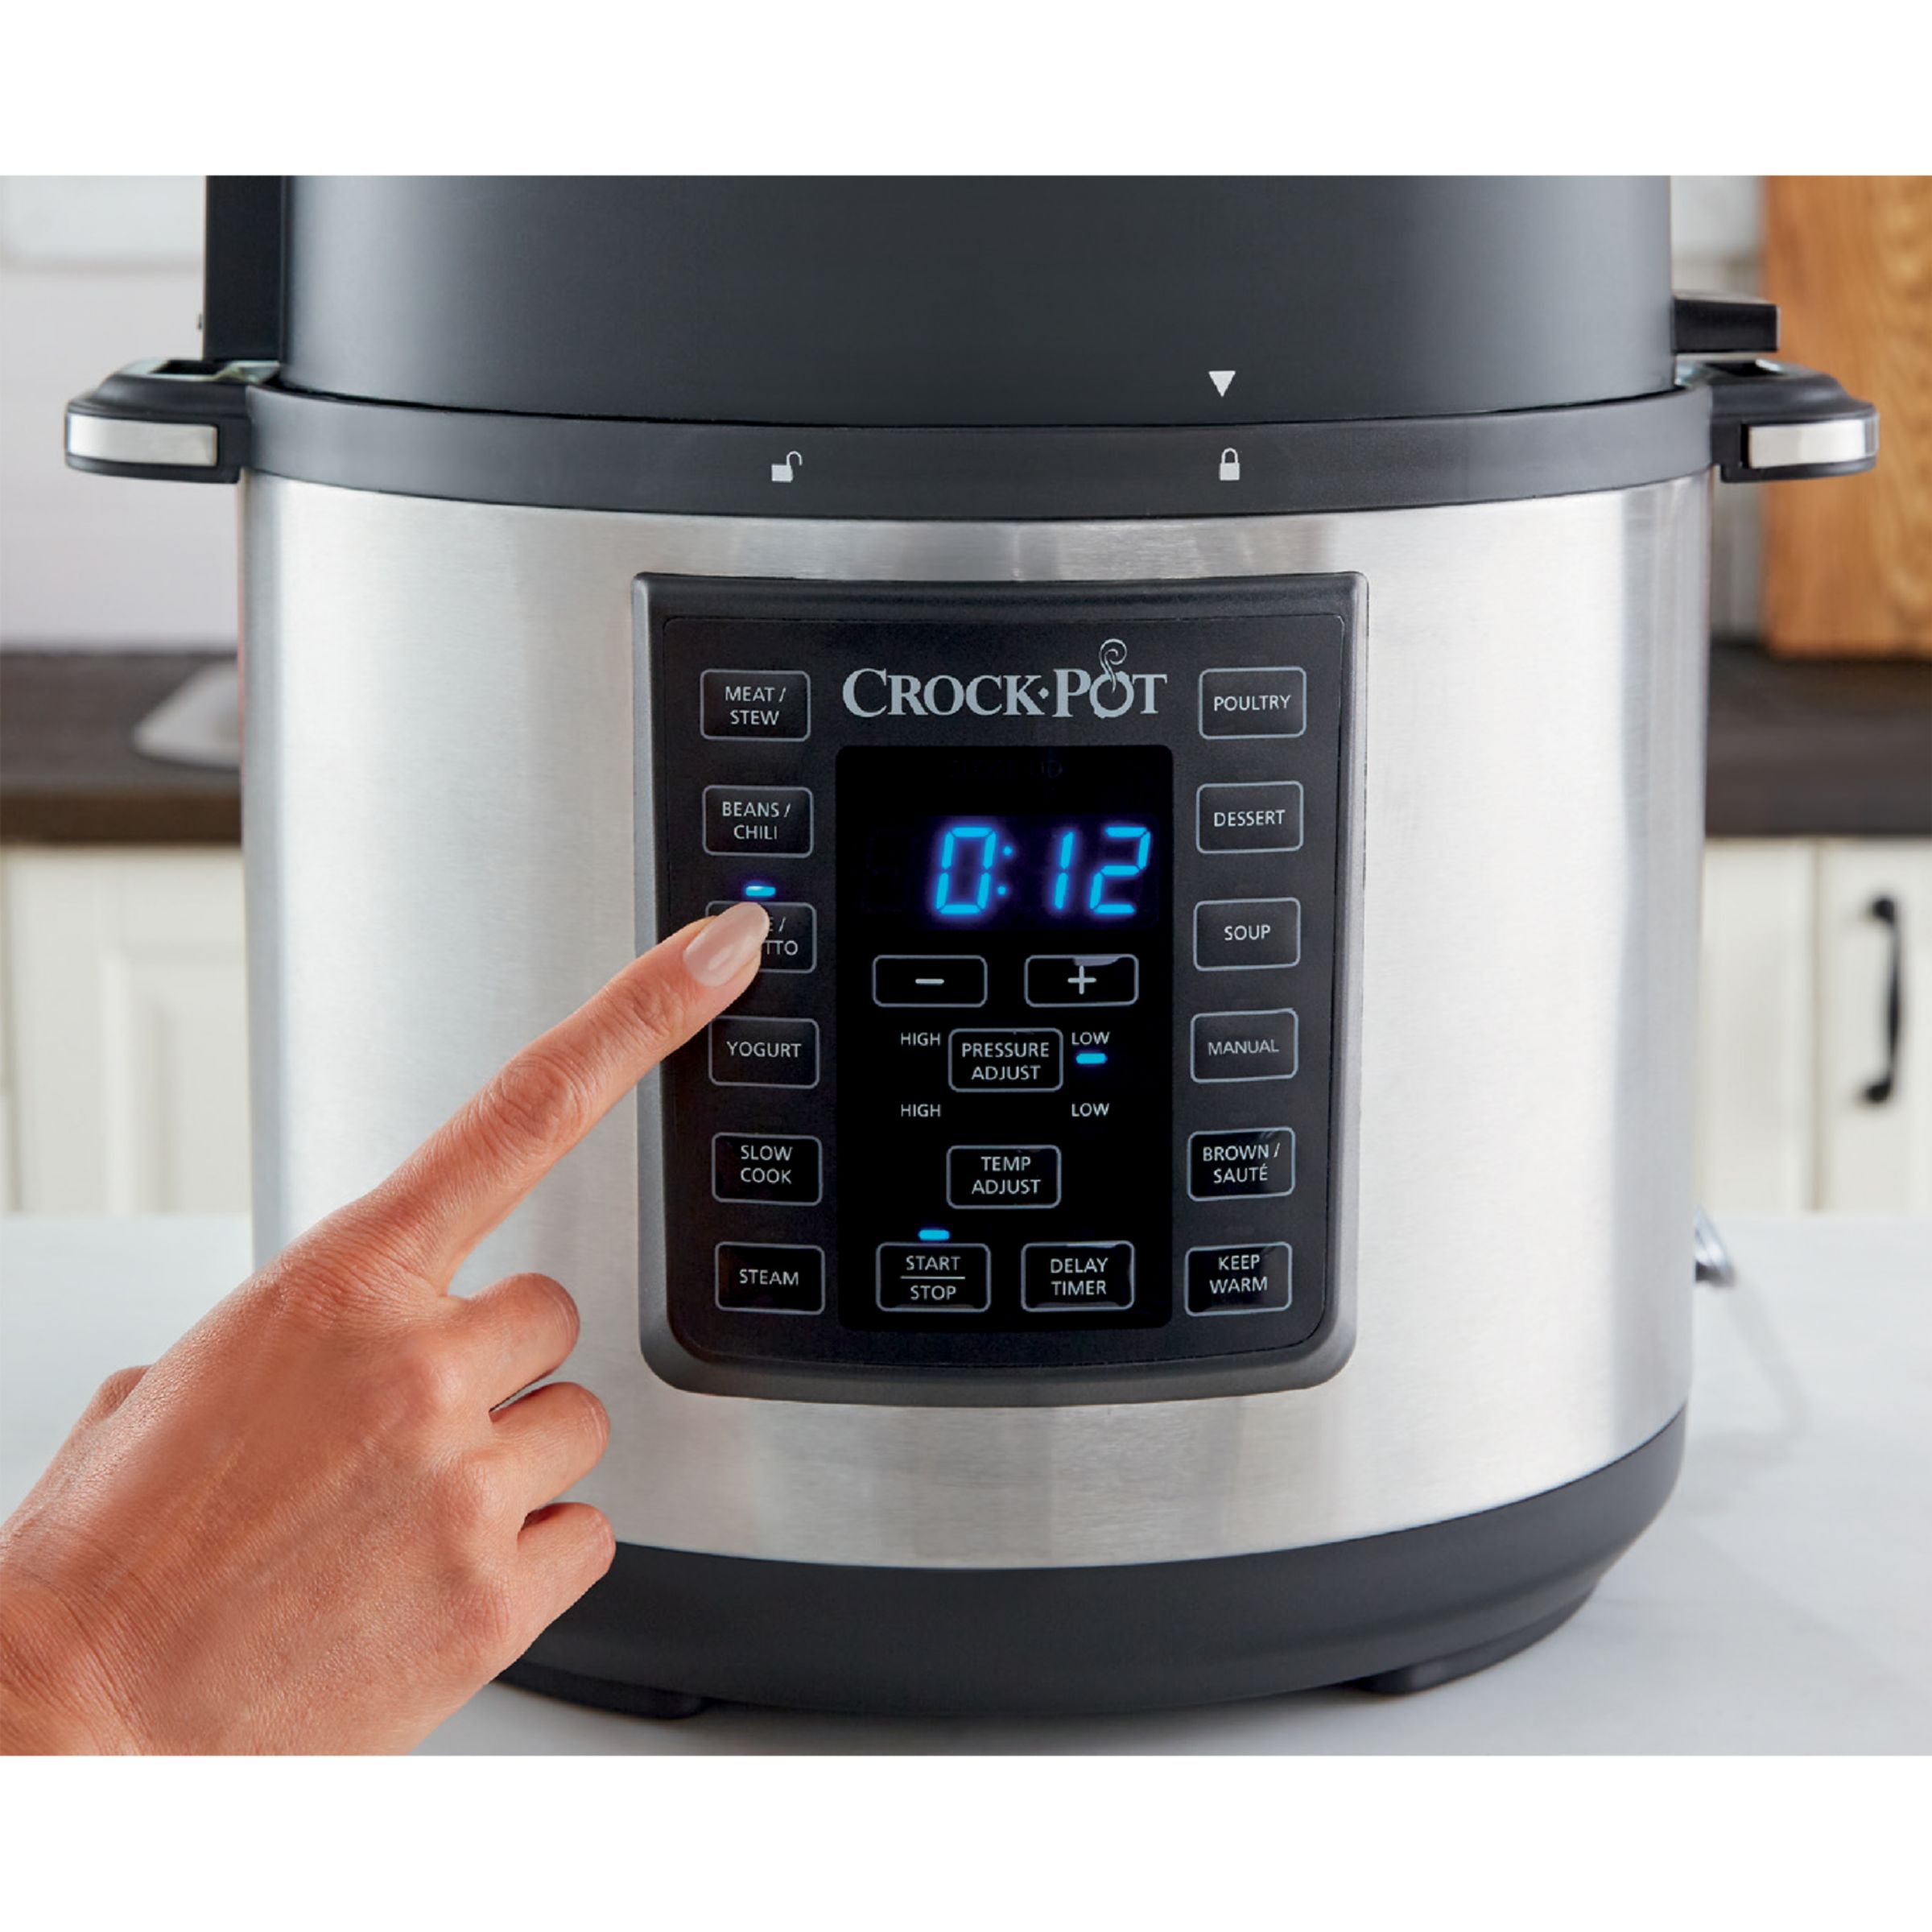 Crock-Pot CSC051 Electric Pressure & Multi-Cooker, 5.6L, Stainless Steel